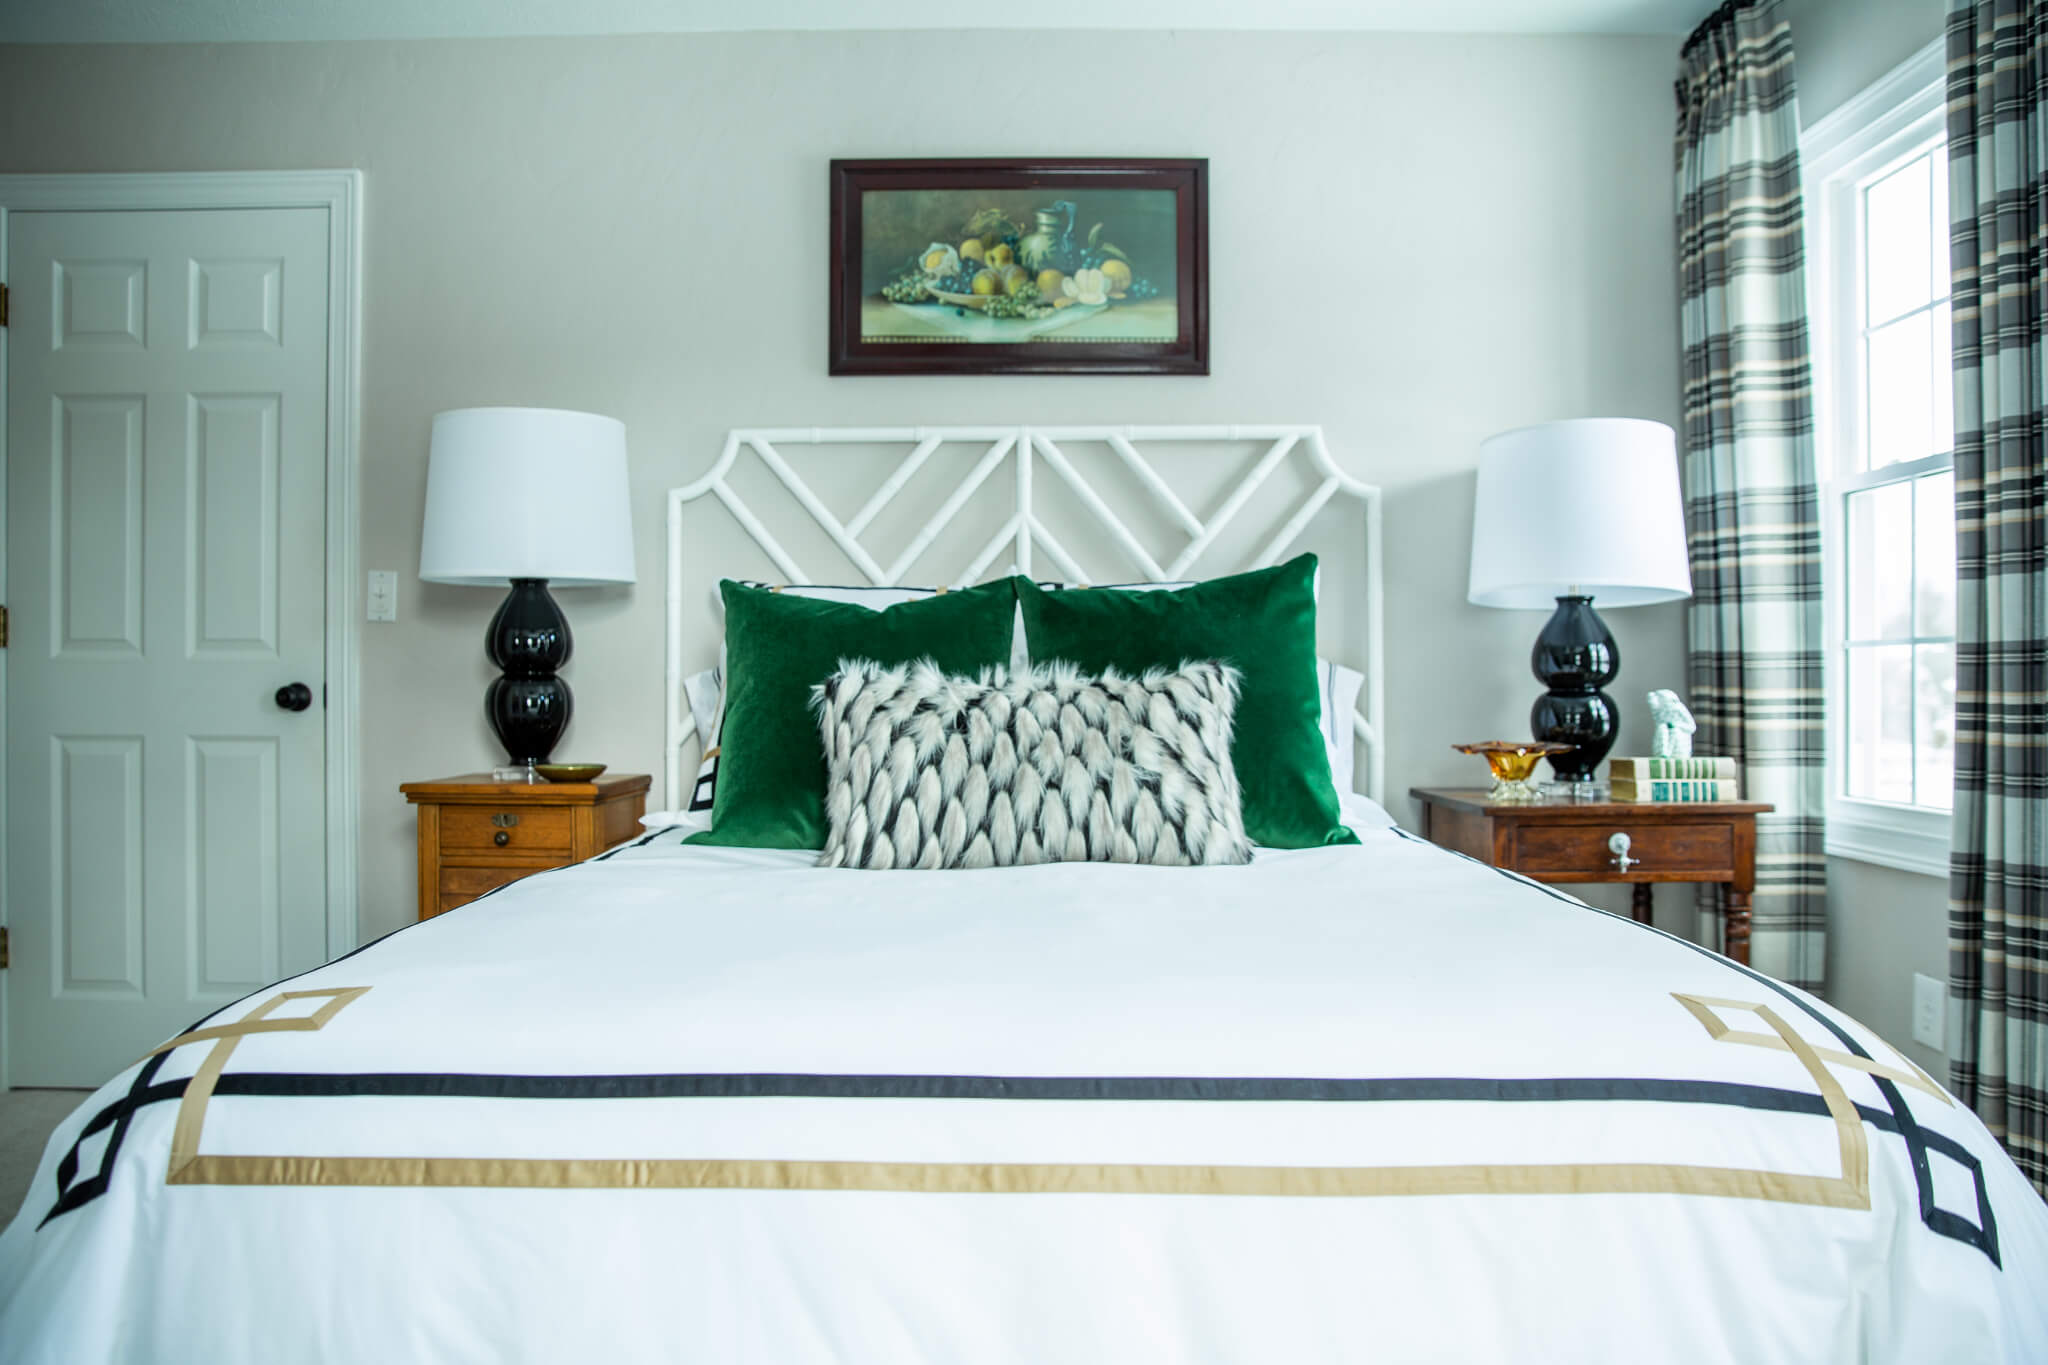 Custom Bedding with Green Pillows Guest Bedroom Eclectic Interiors